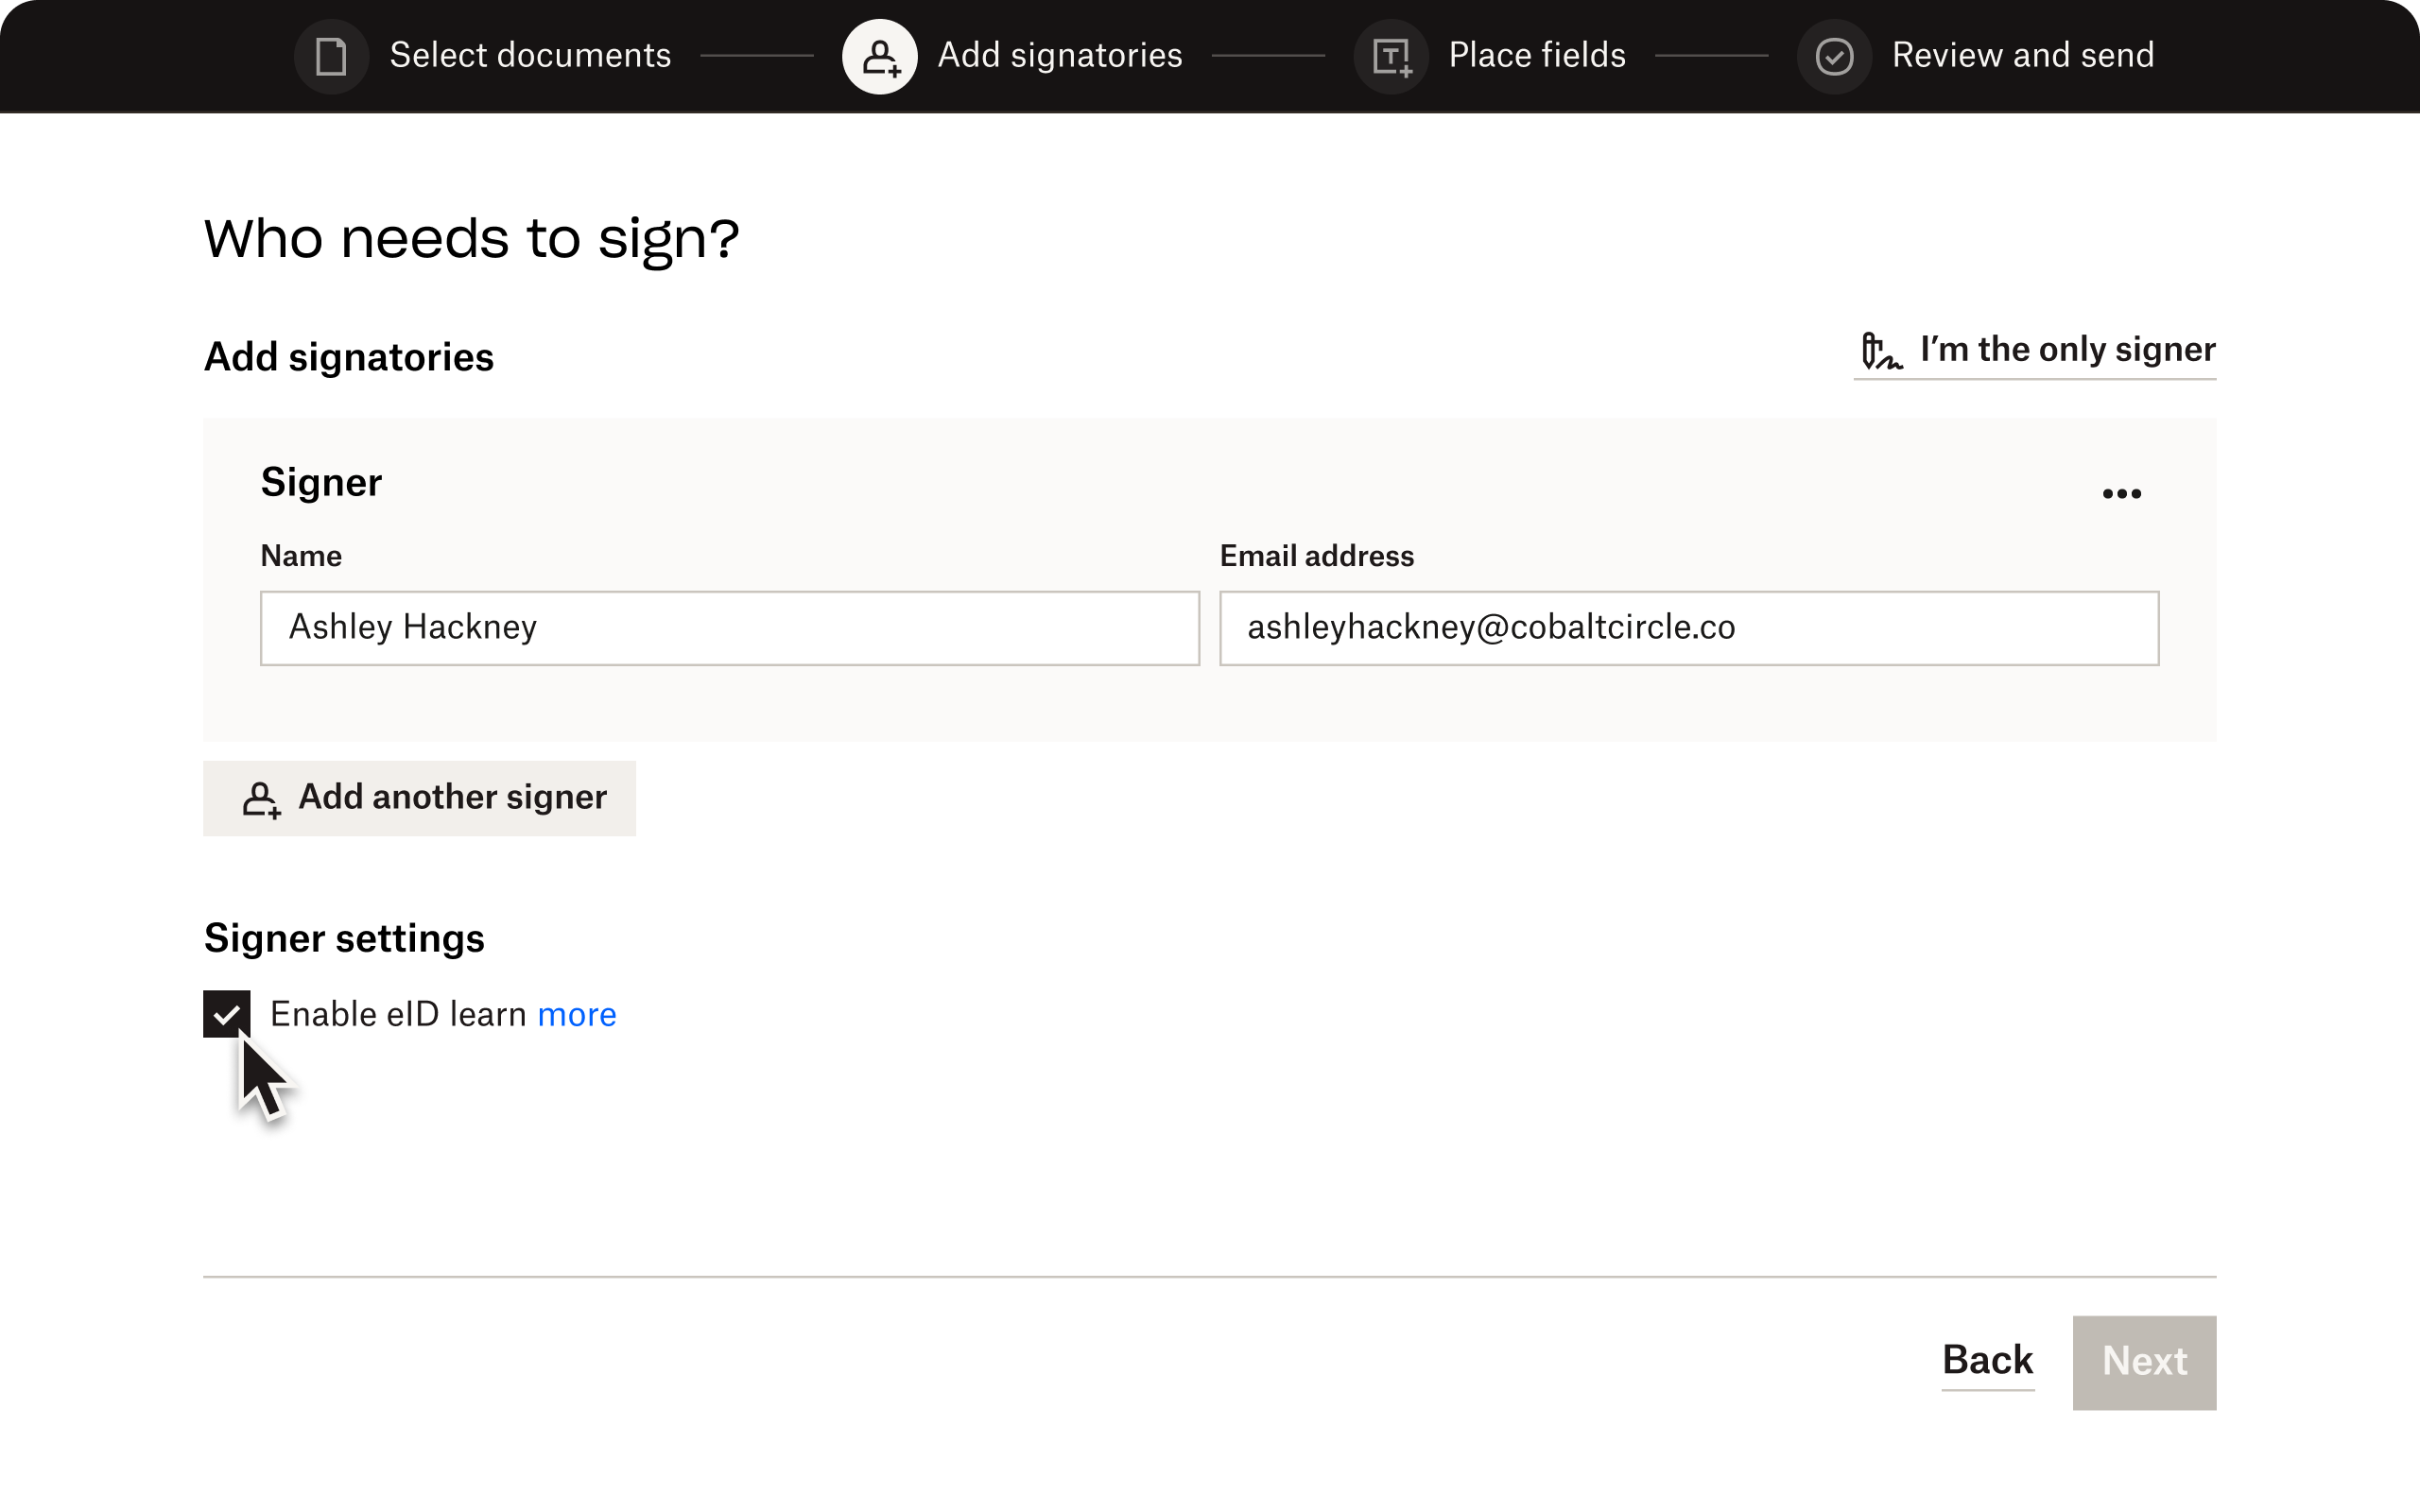 The second step of Dropbox Sign, where a user can add signers and enable eID